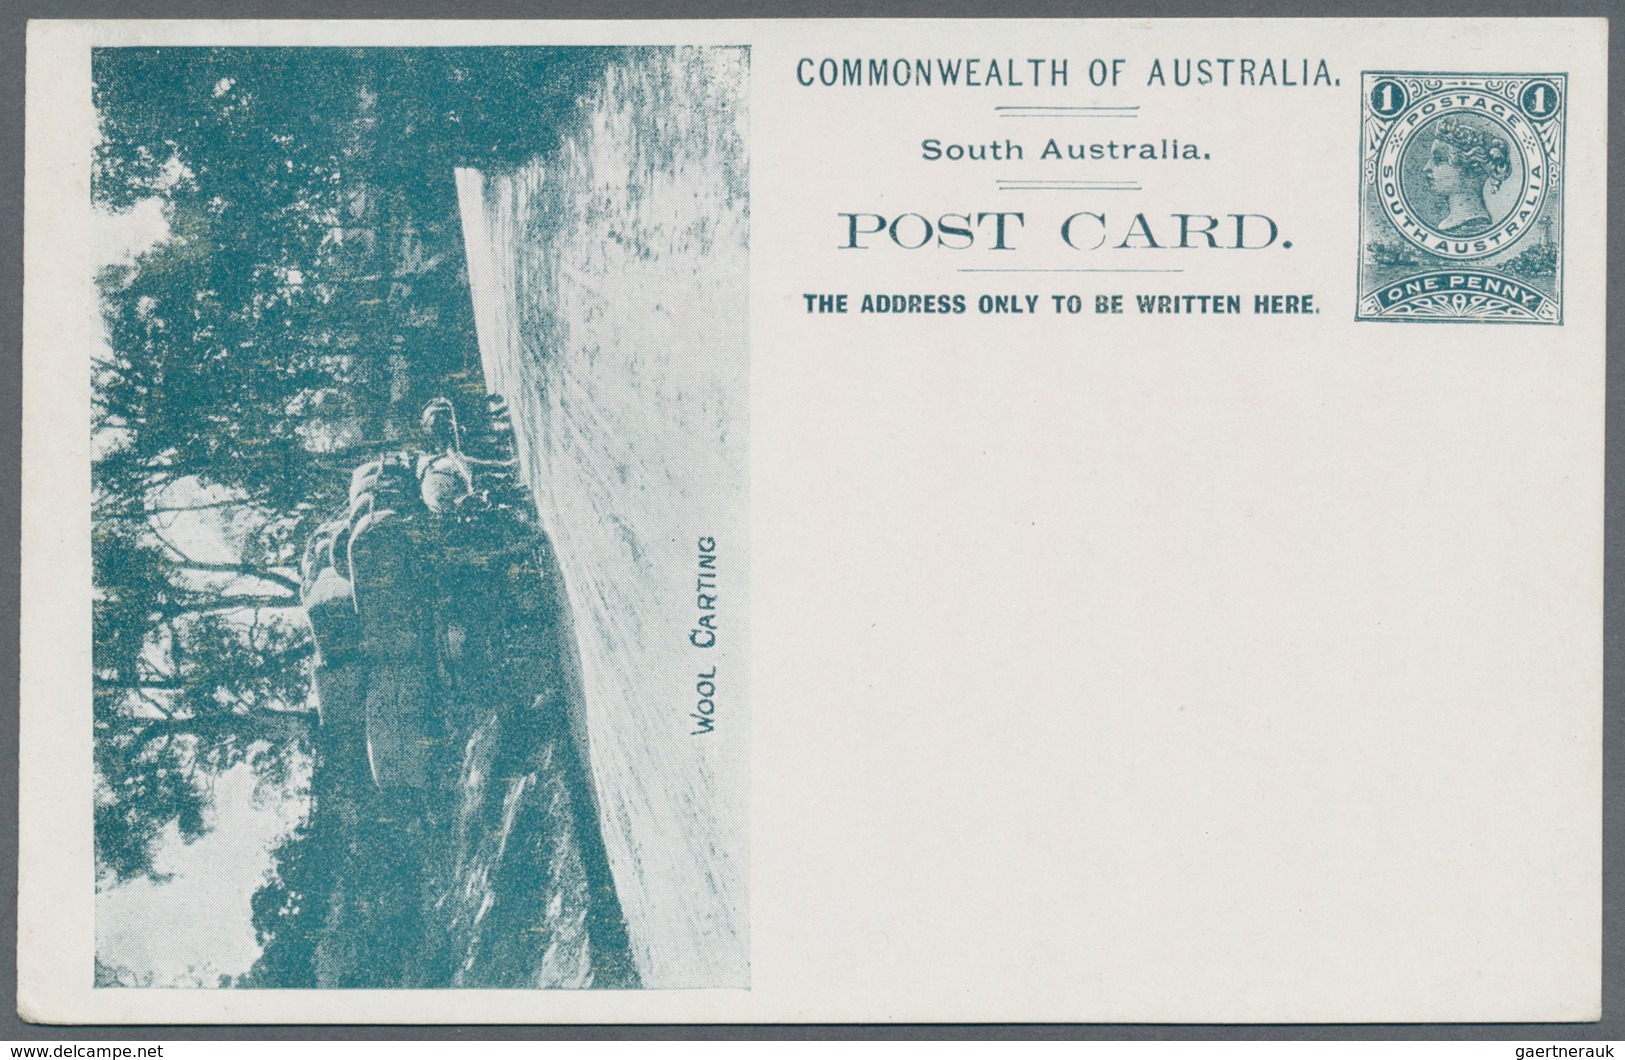 Südaustralien: 1908, eight different pictorial stat. postcards QV 1d. (Adelaide ptg. with dot after